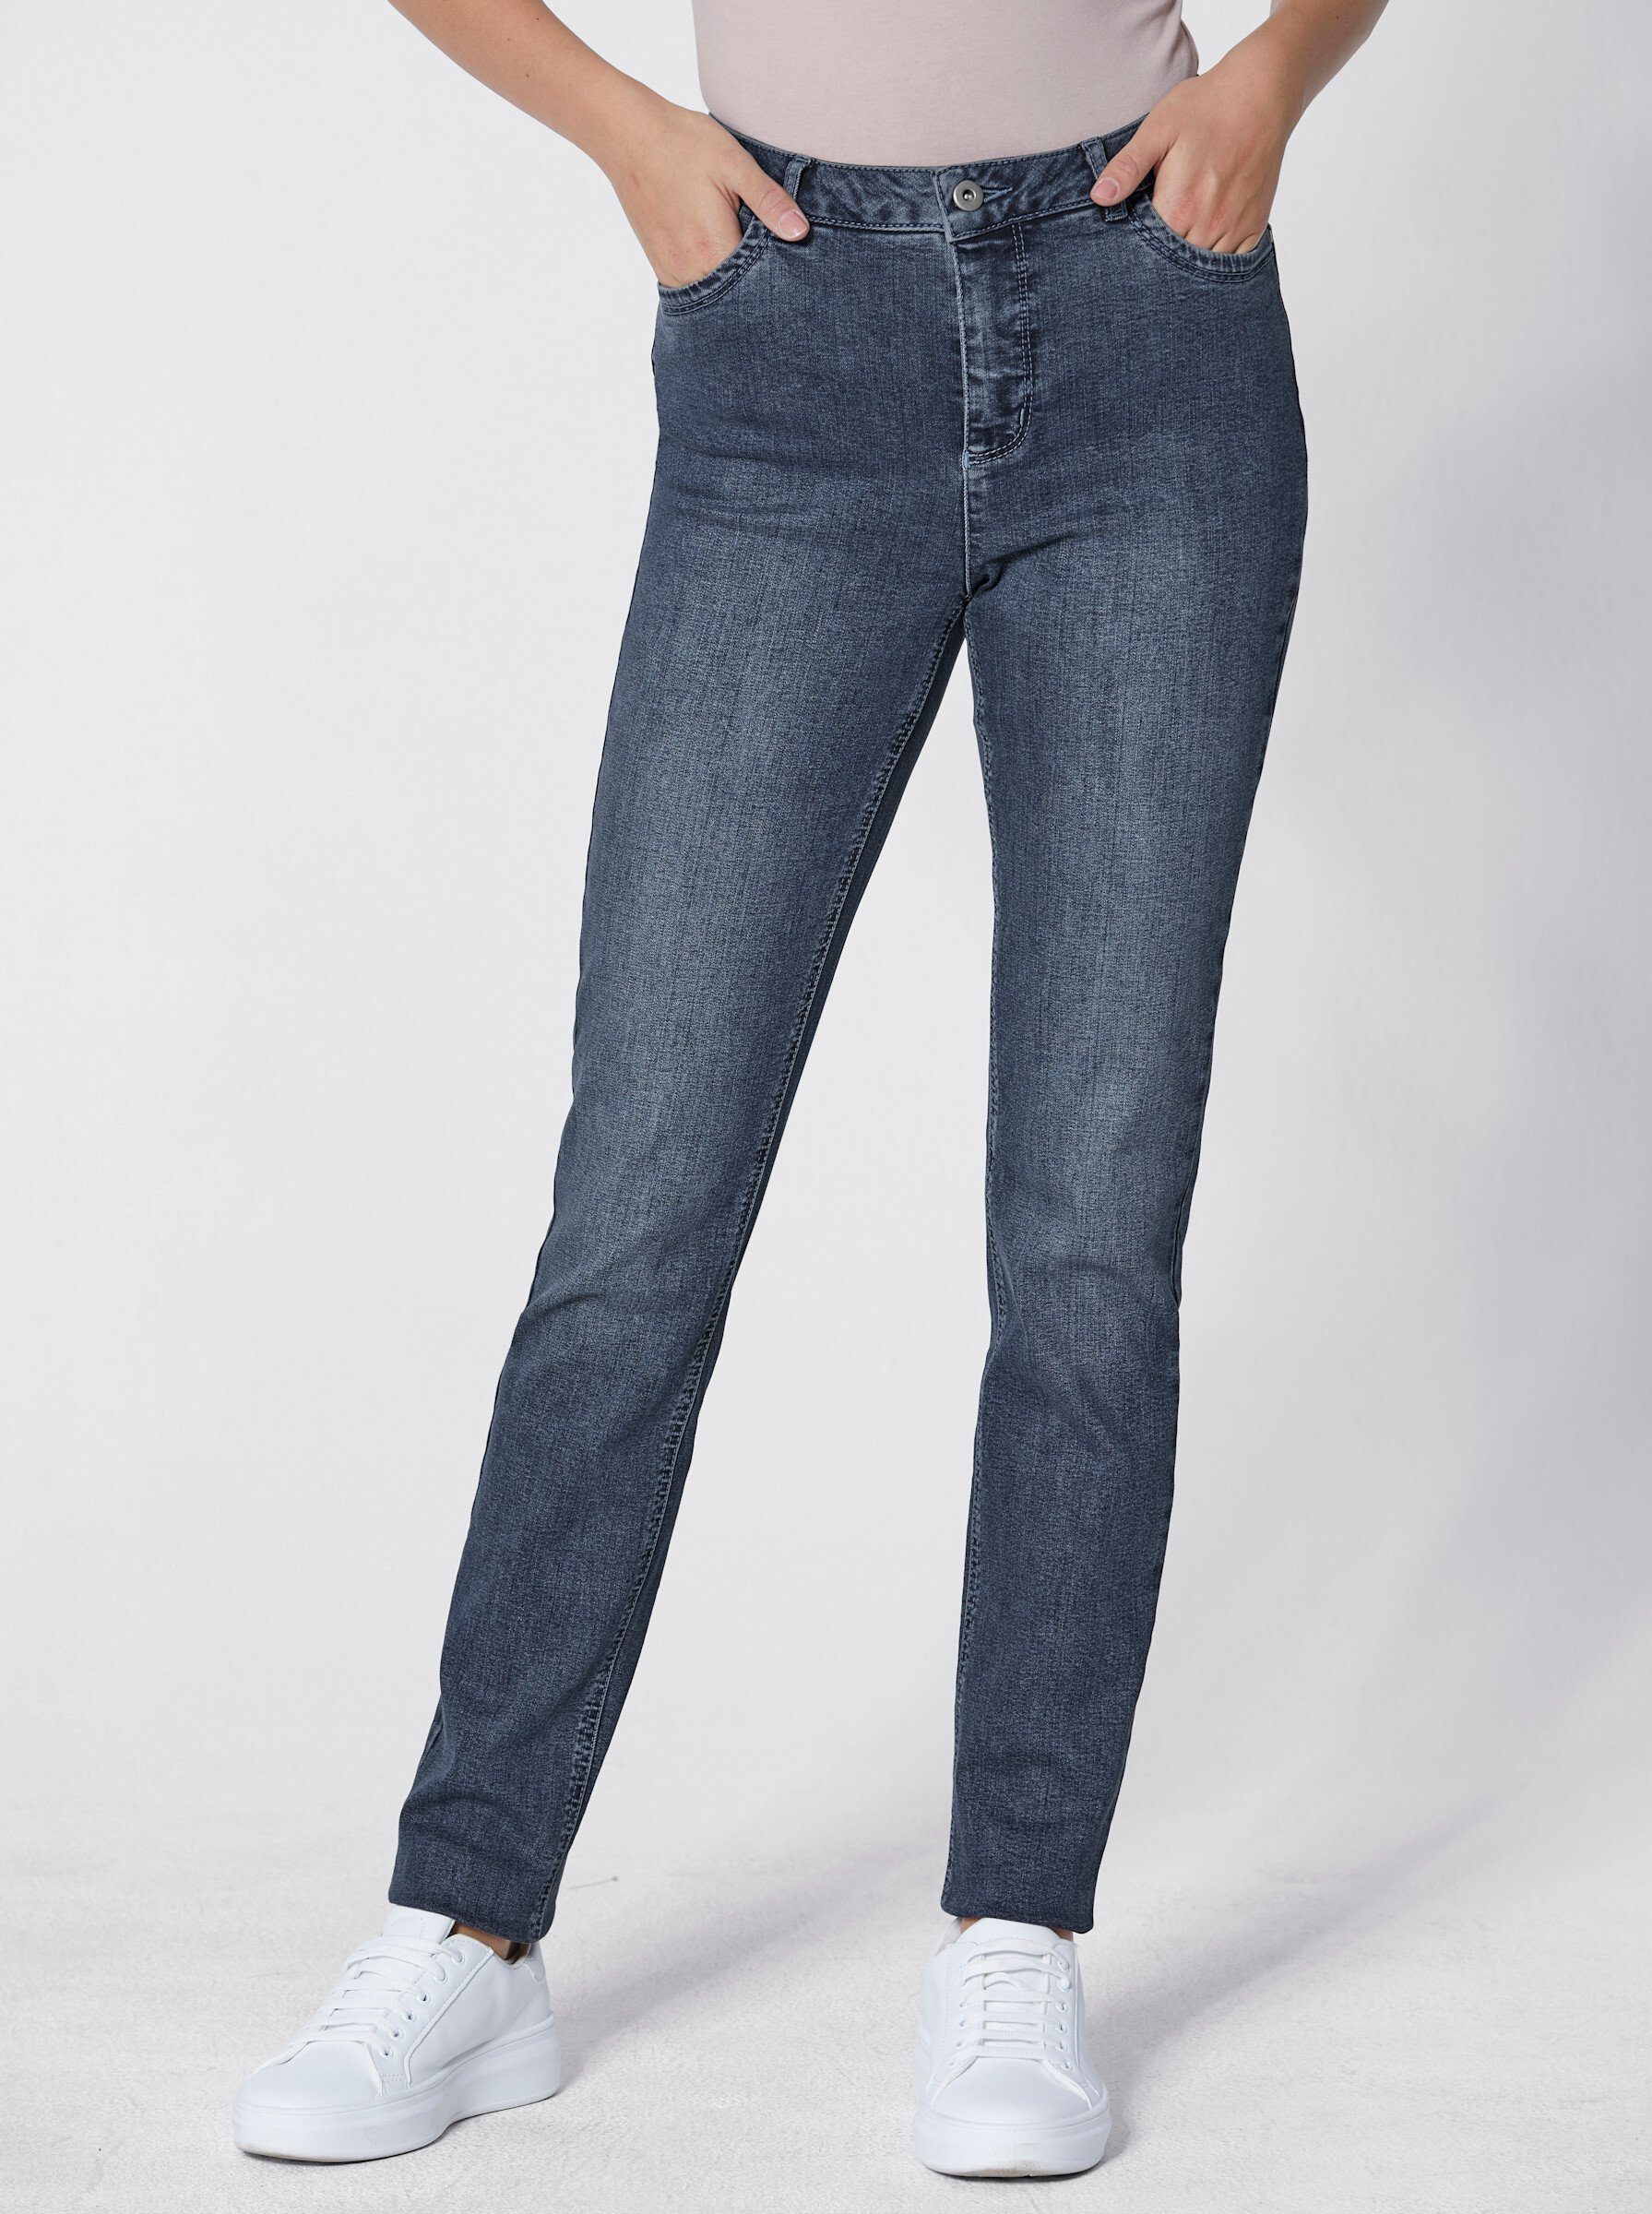 creation L Bequeme Jeans blue-stone-washed